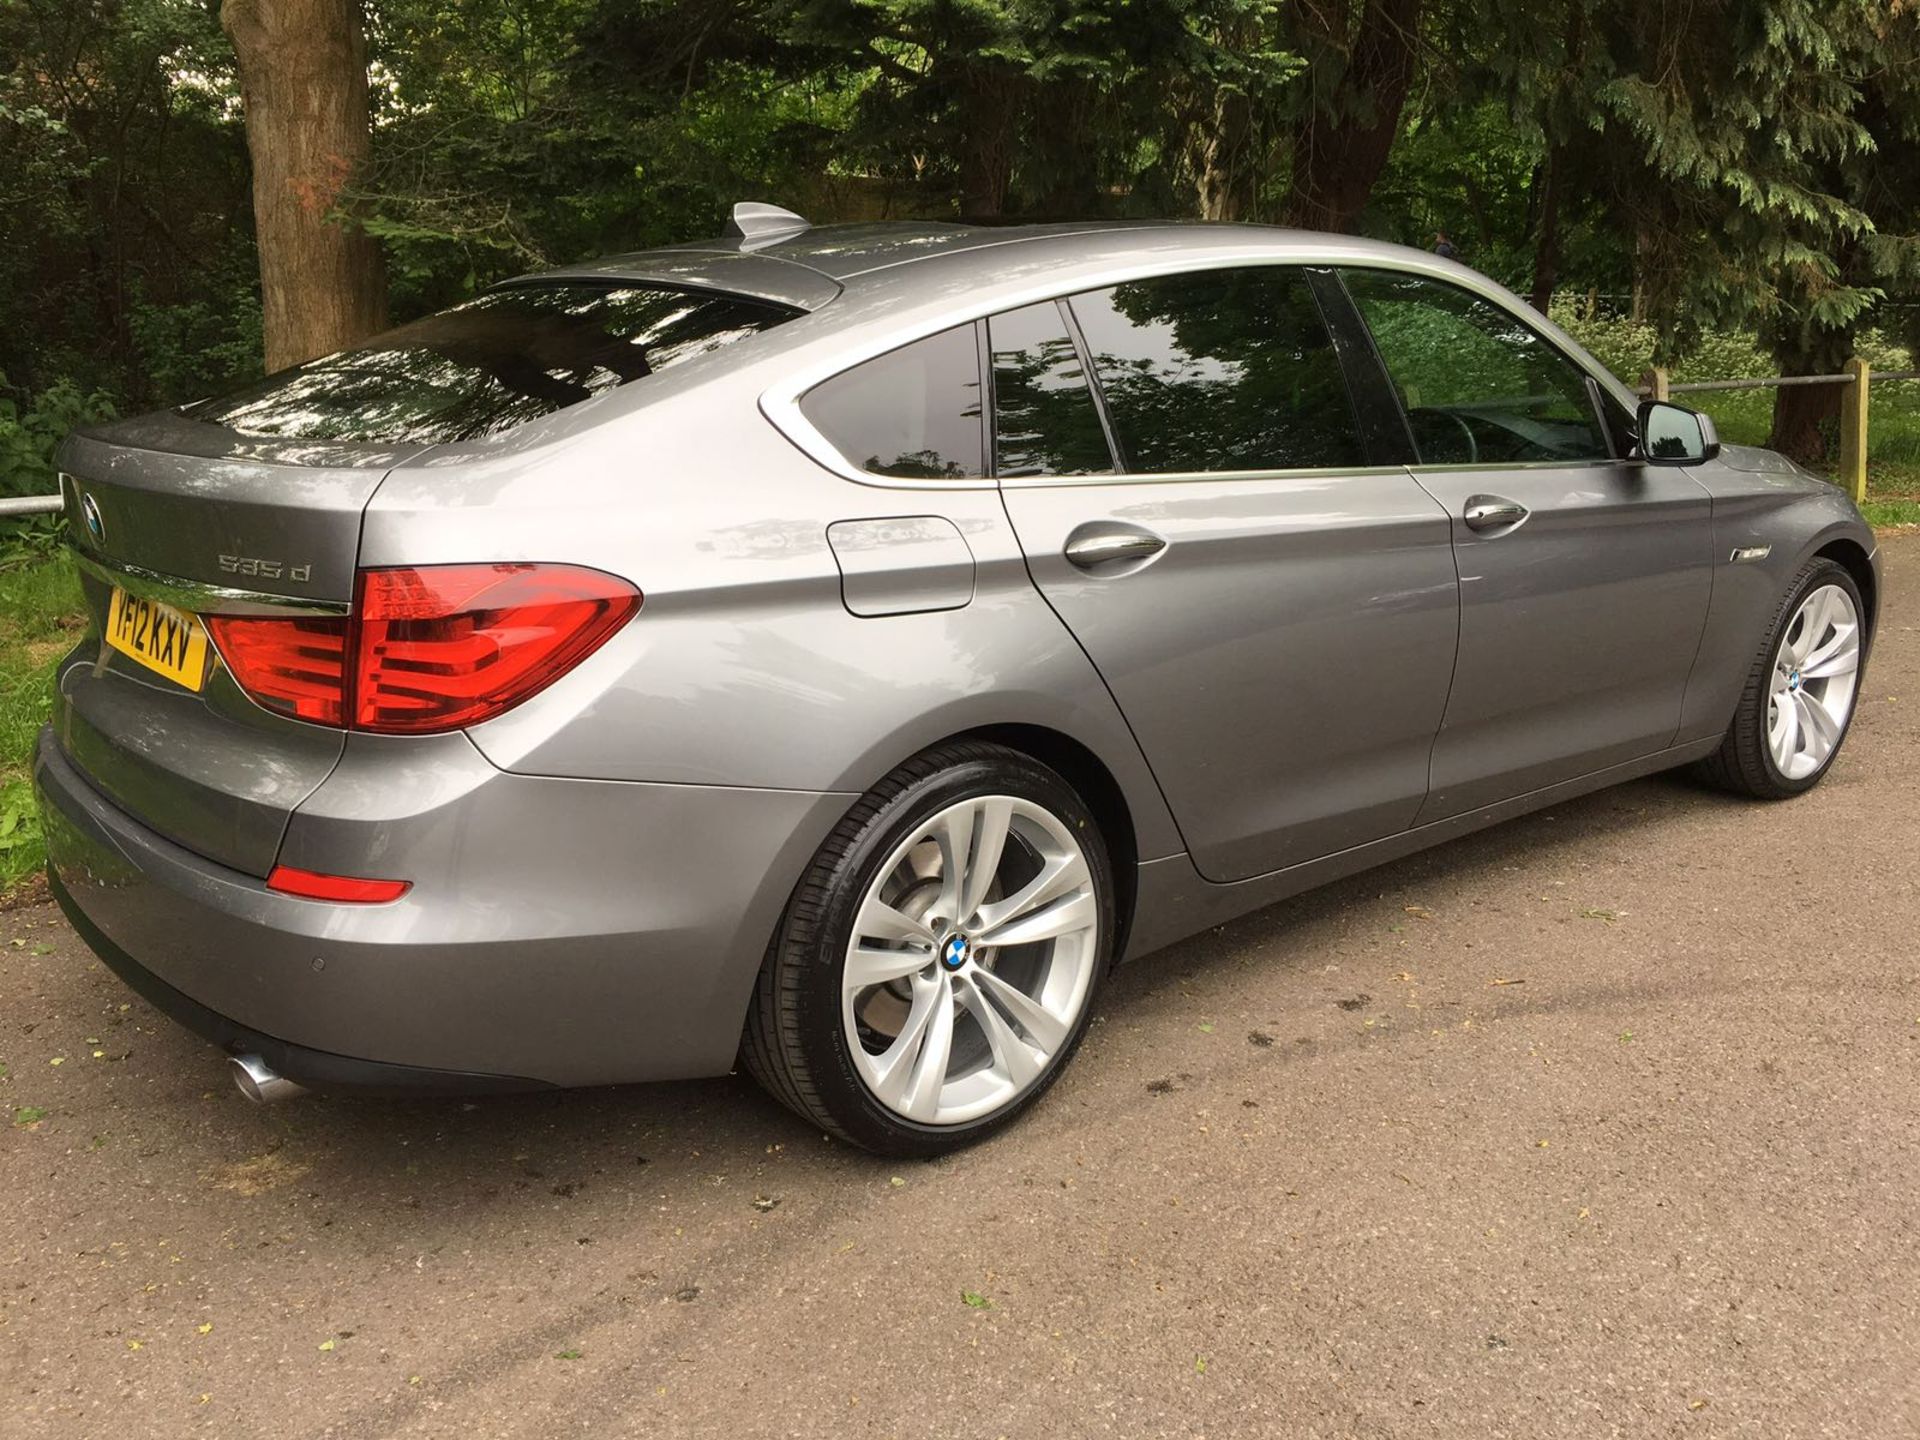 BMW 535d GT GRAN TURISMO 2012/12. 57,000 miles Mega spec and fully loaded. 4 New Tyres Just Fitted! - Image 10 of 19